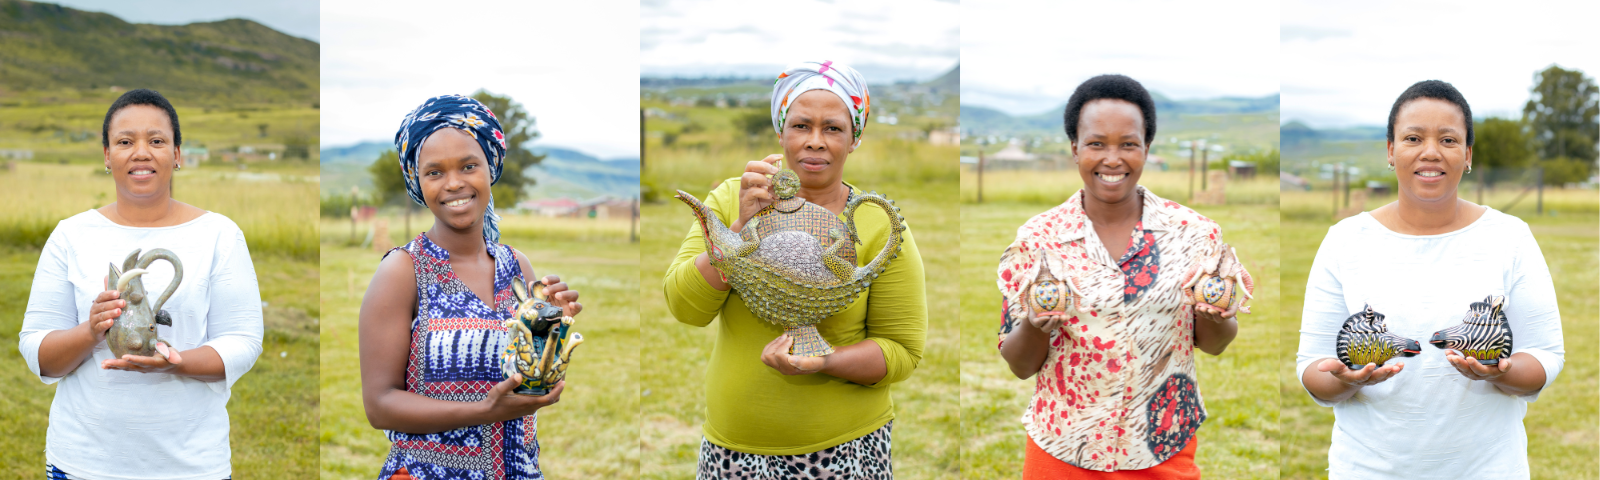 A New Chapter: How Lungelo and LoveArt Ceramics Are Redefining Lives in Rural South Africa